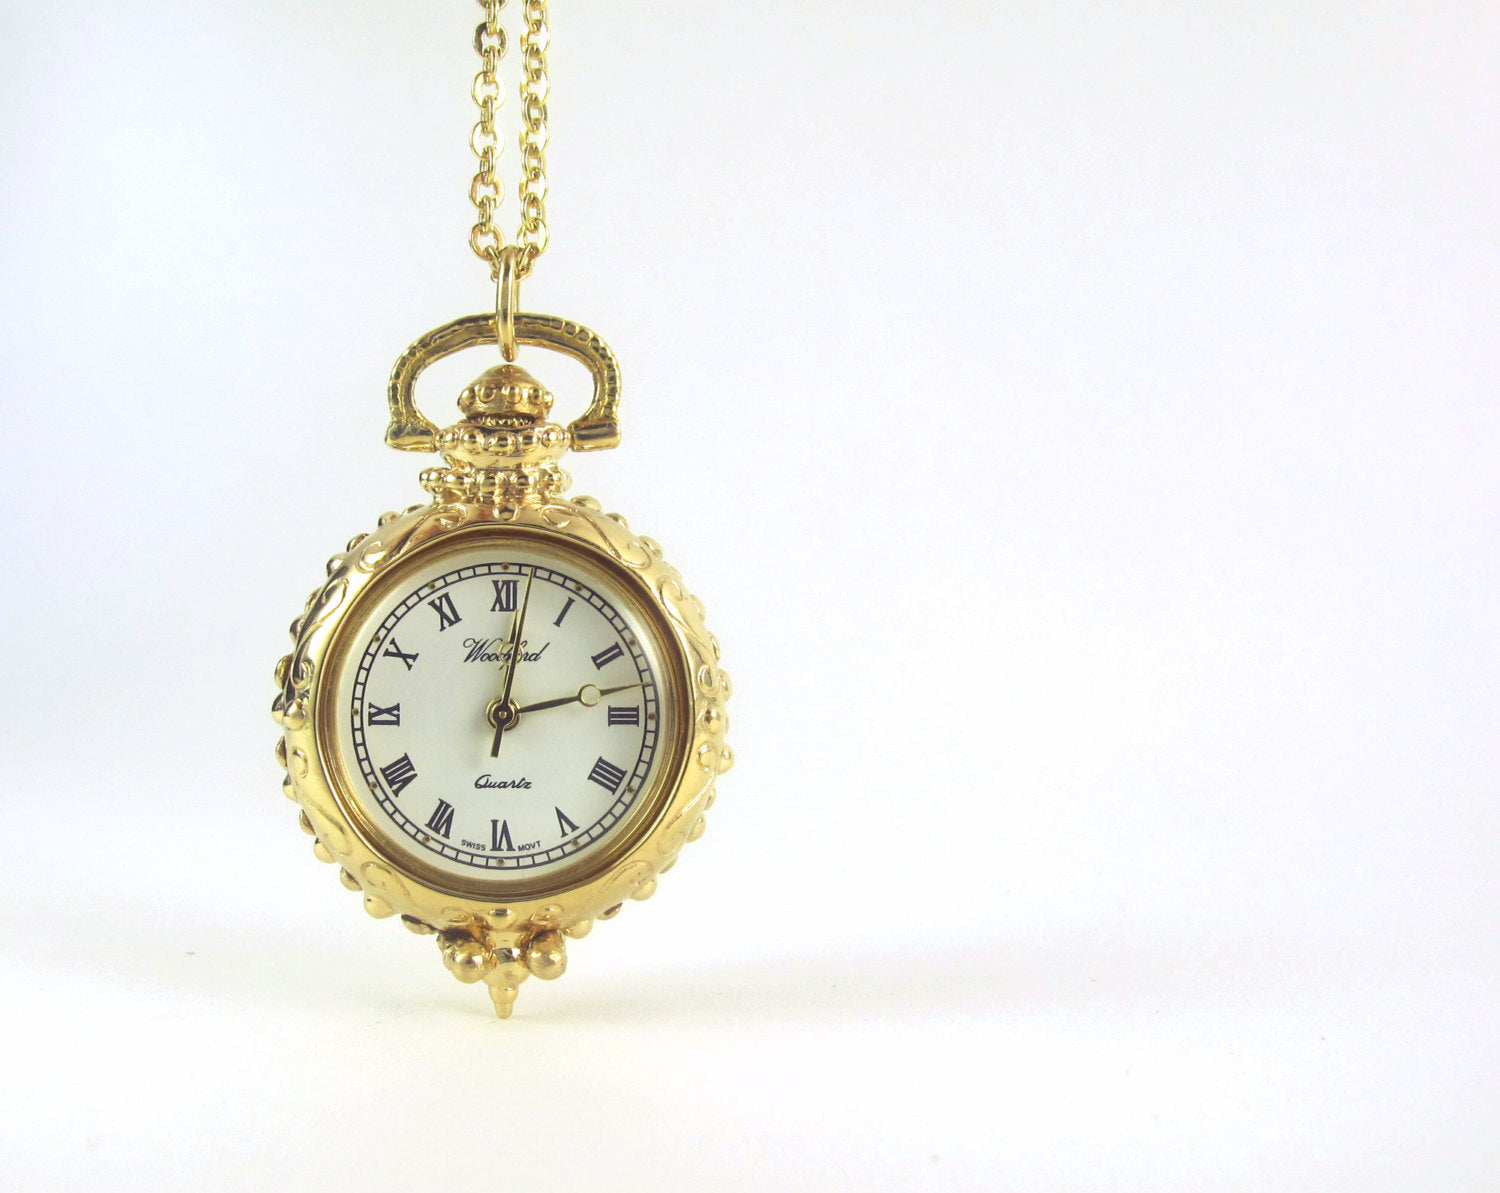 Solid Gold Watch Pendant - Caduceus, Quality Quartz Woodford Watch with Second Hand, Nurse Fob Watch, Solid Gold Watch, Handmade 162-3-4